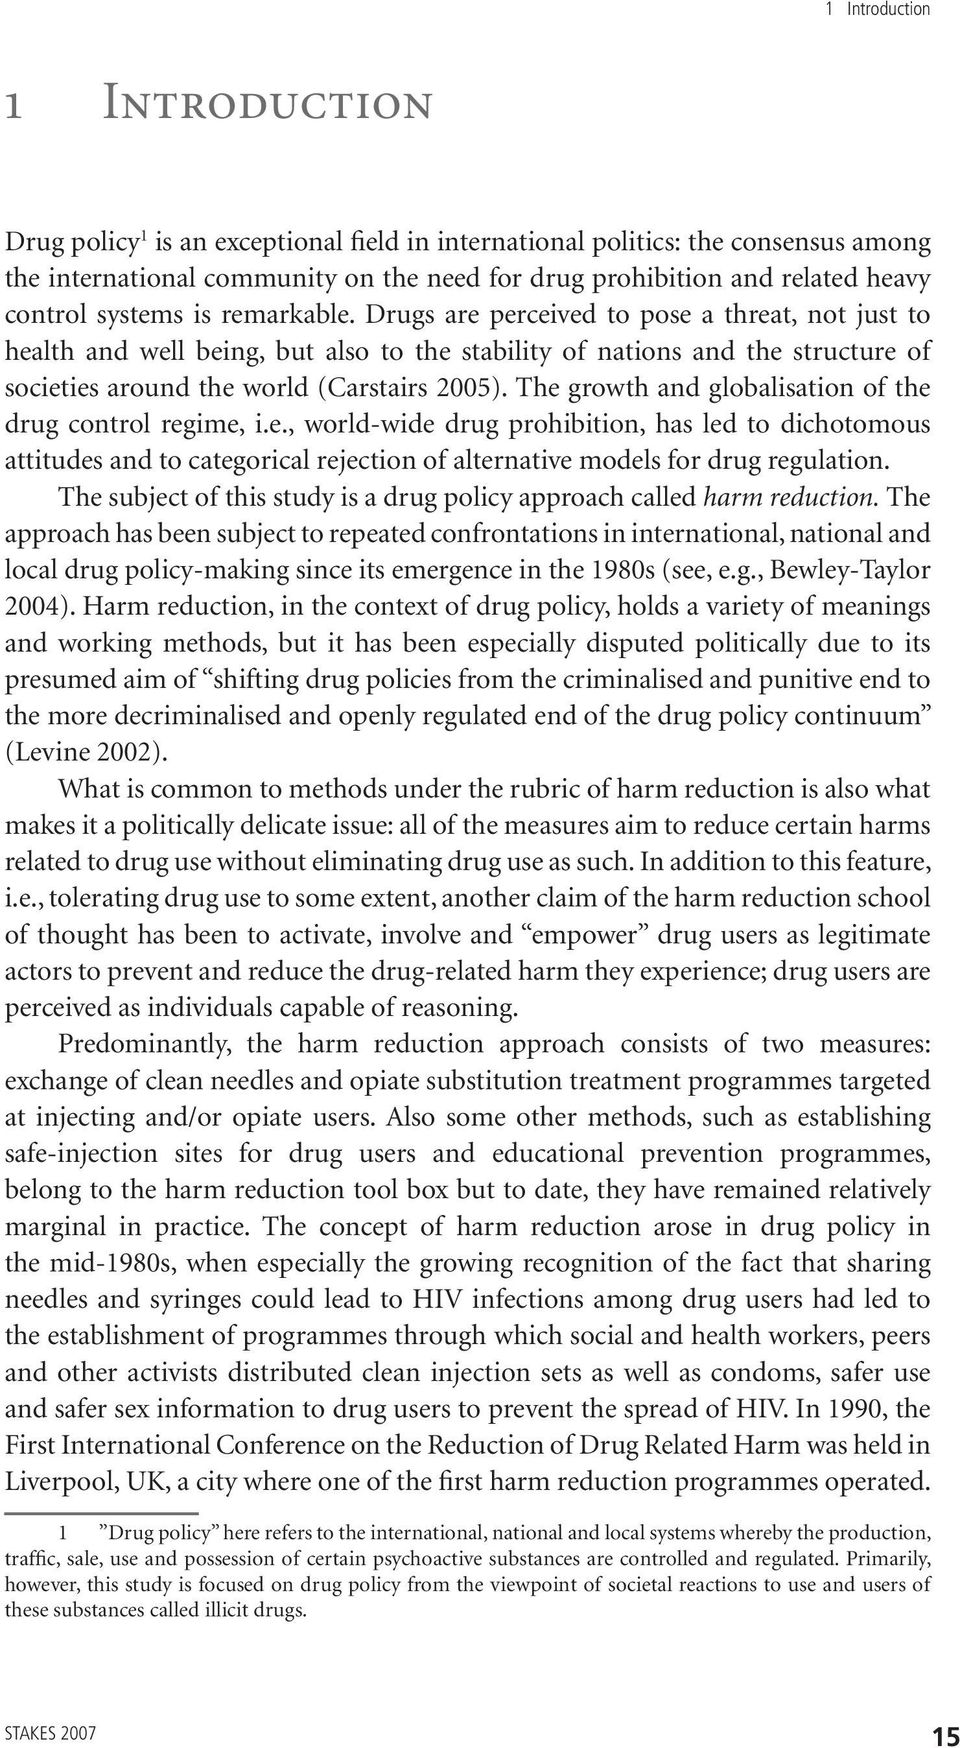 Drugs are perceived to pose a threat, not just to health and well being, but also to the stability of nations and the structure of societies around the world (Carstairs 2005).